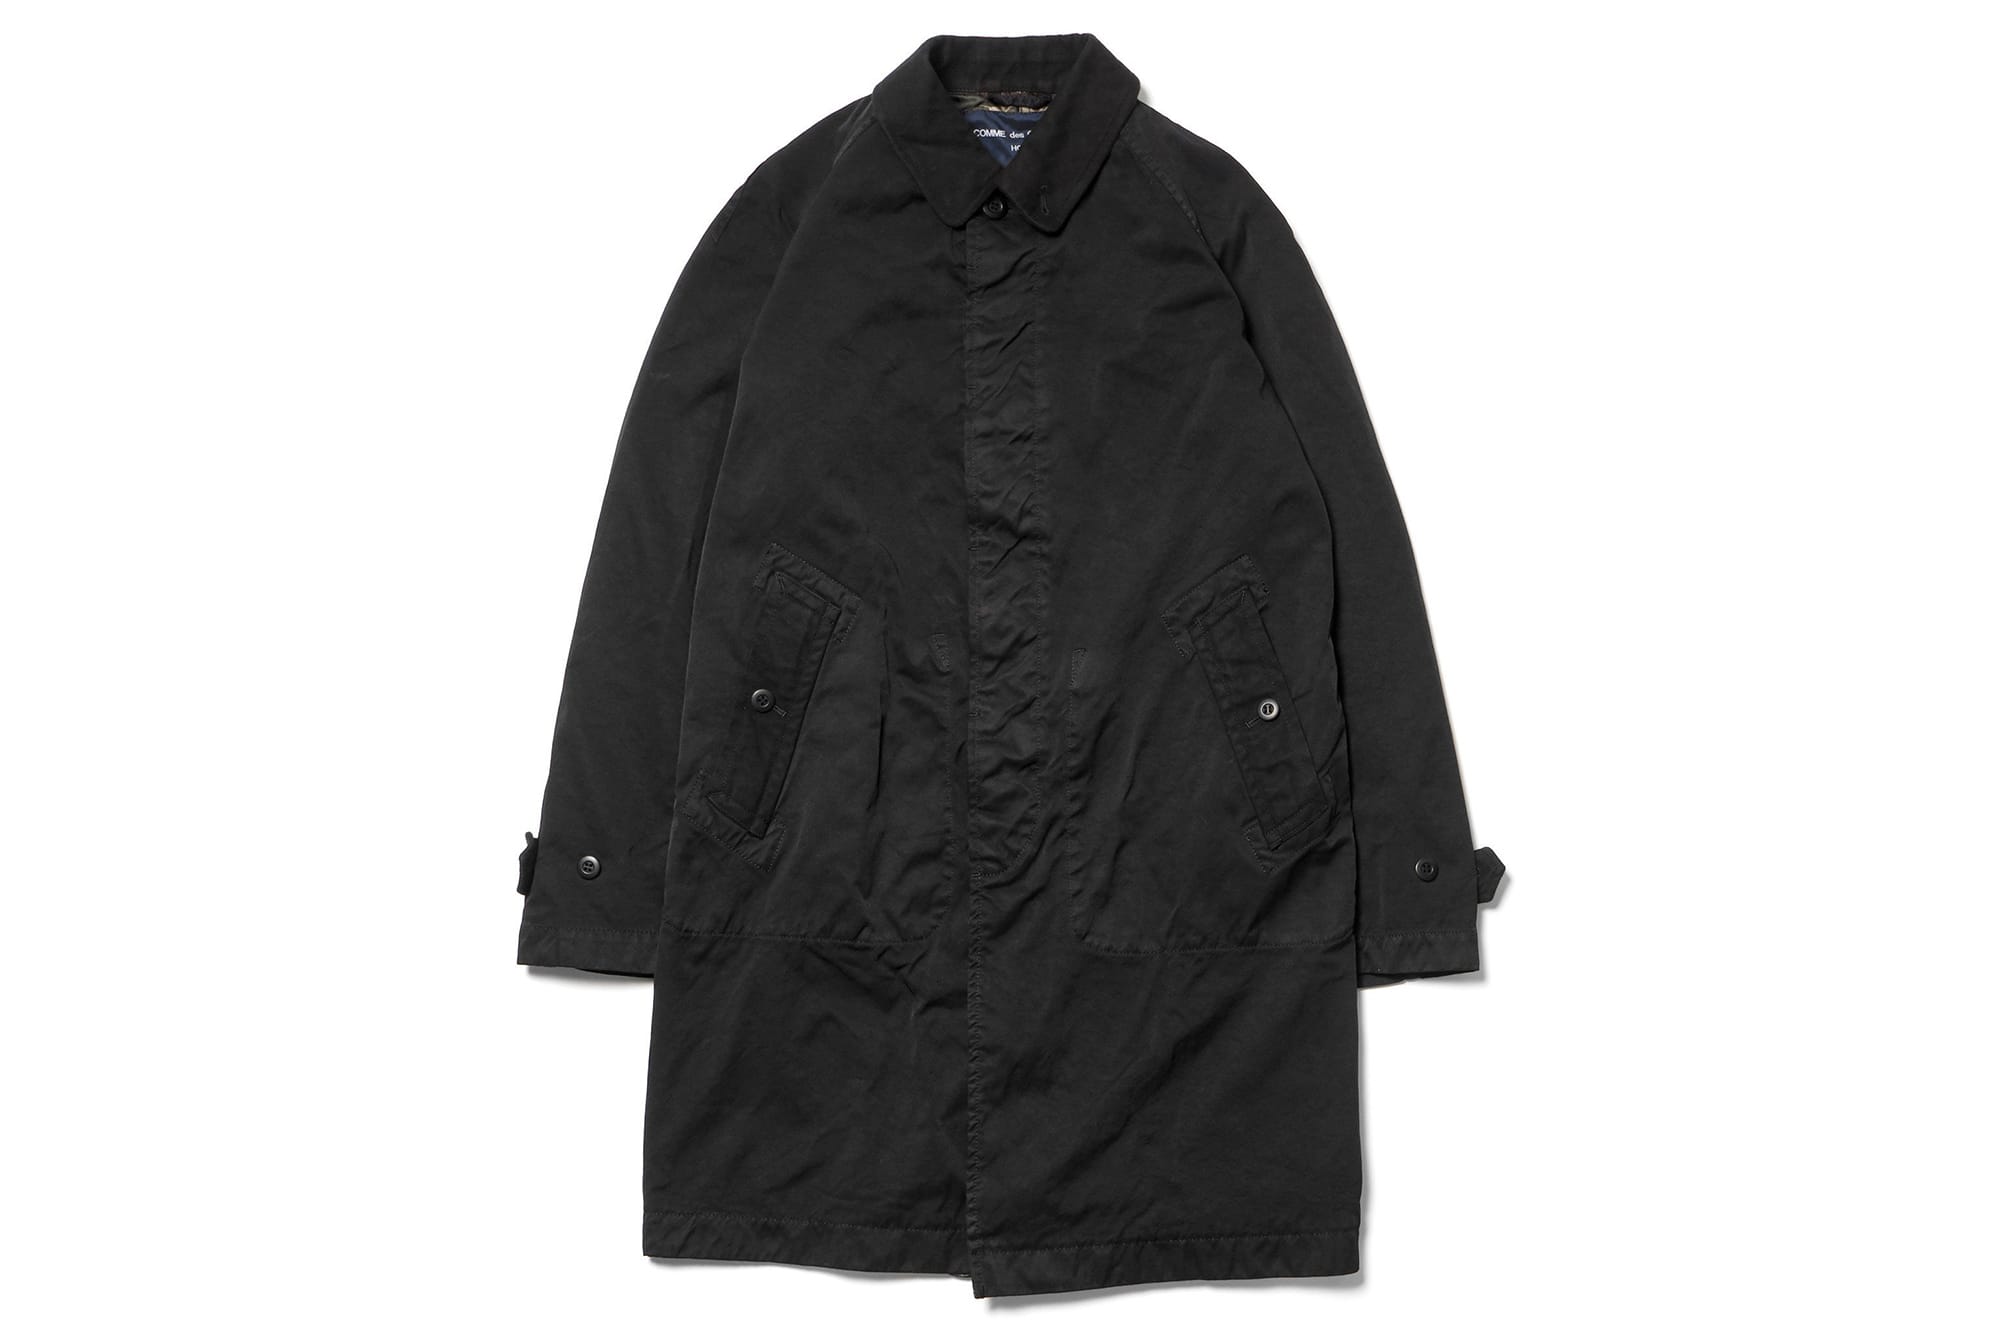 COMME Des GARÇONS Homme New MIlitary Jackets For Fall/Winter 2016 